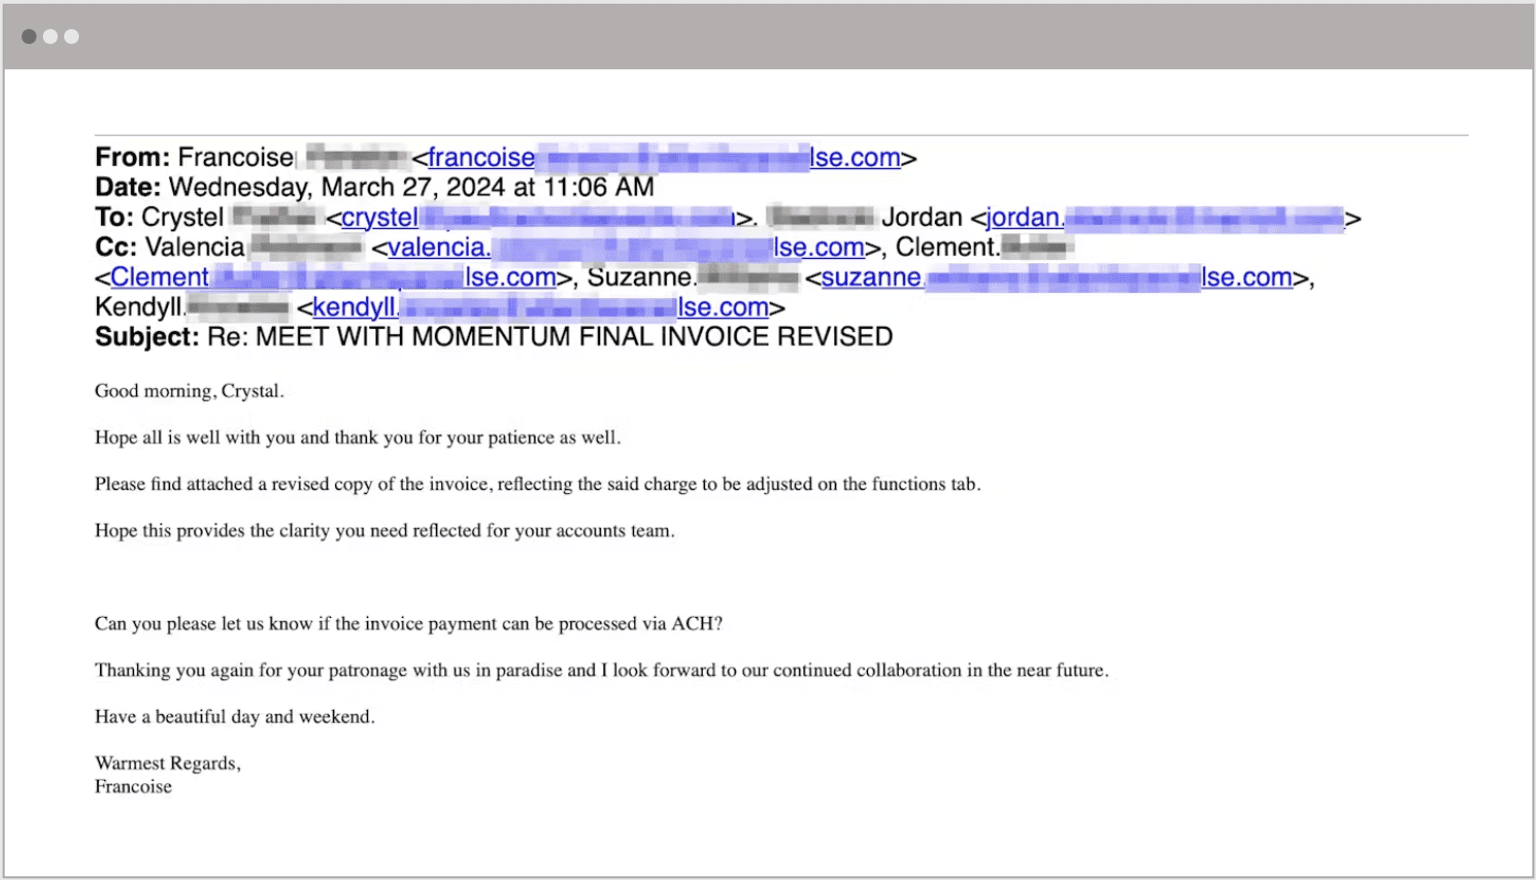 Thread Hijacking Email Example 4